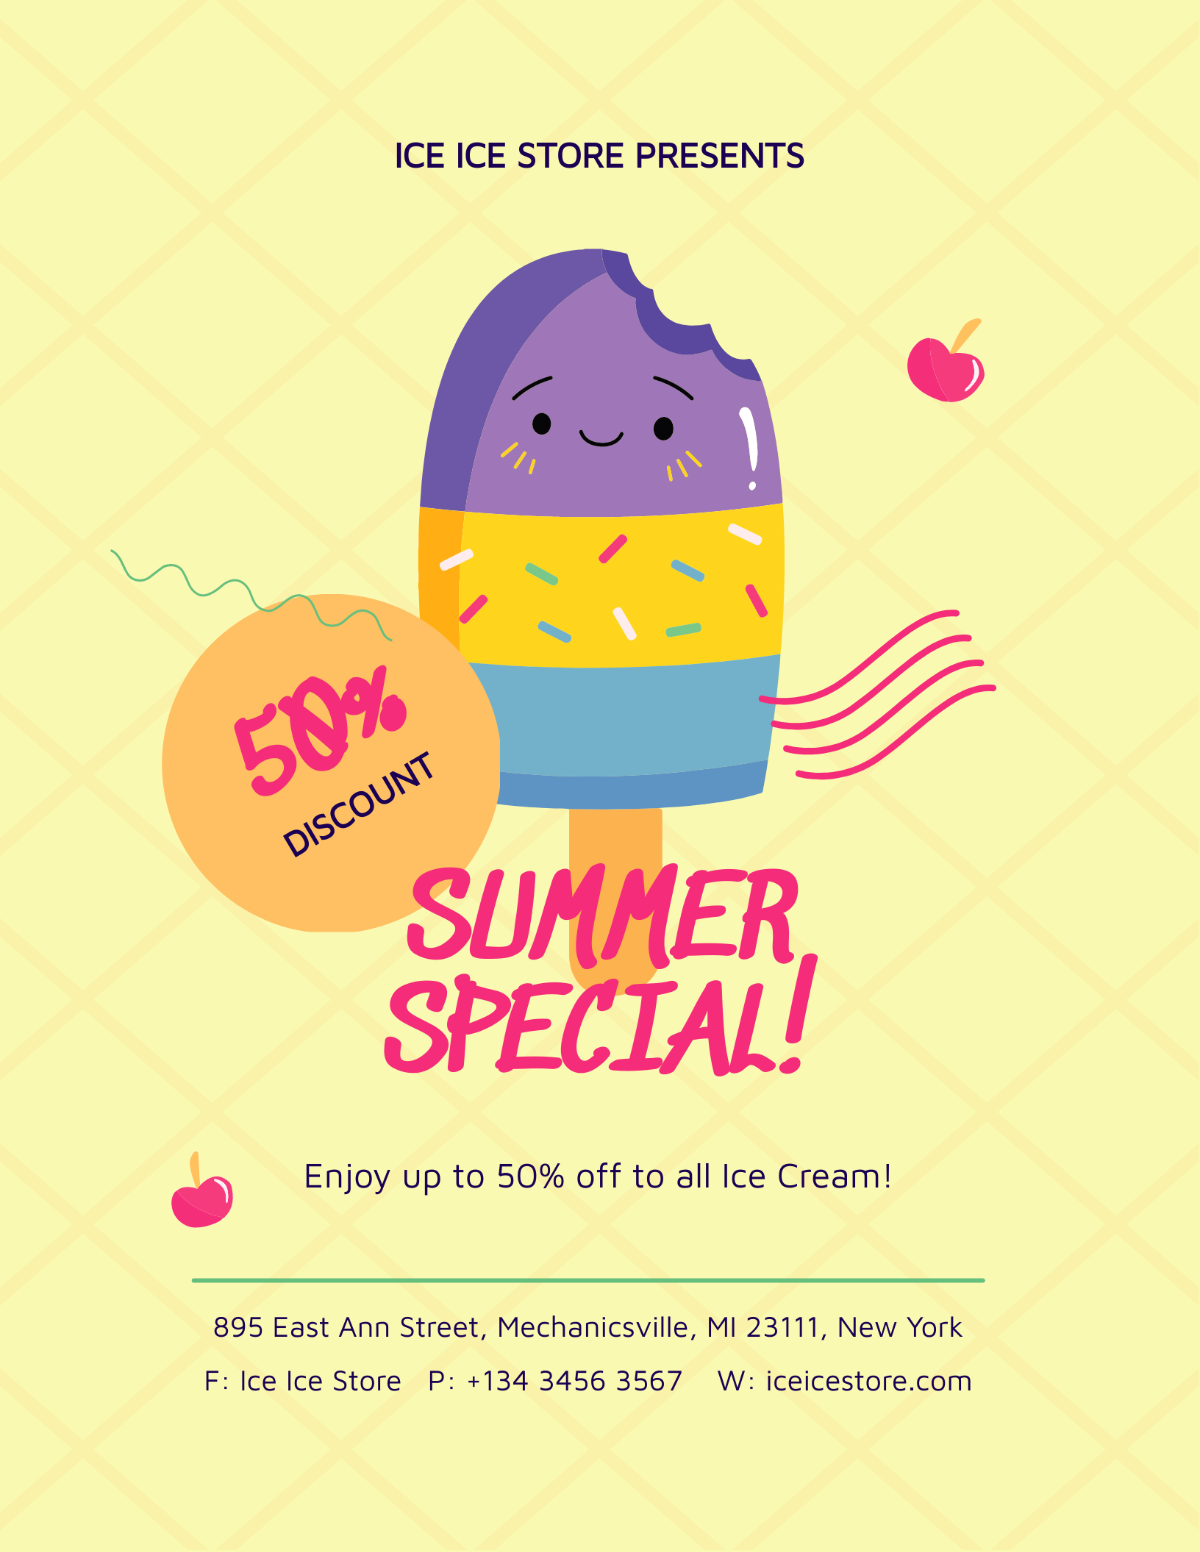 Ice Cream Shop Promotion Flyer Template